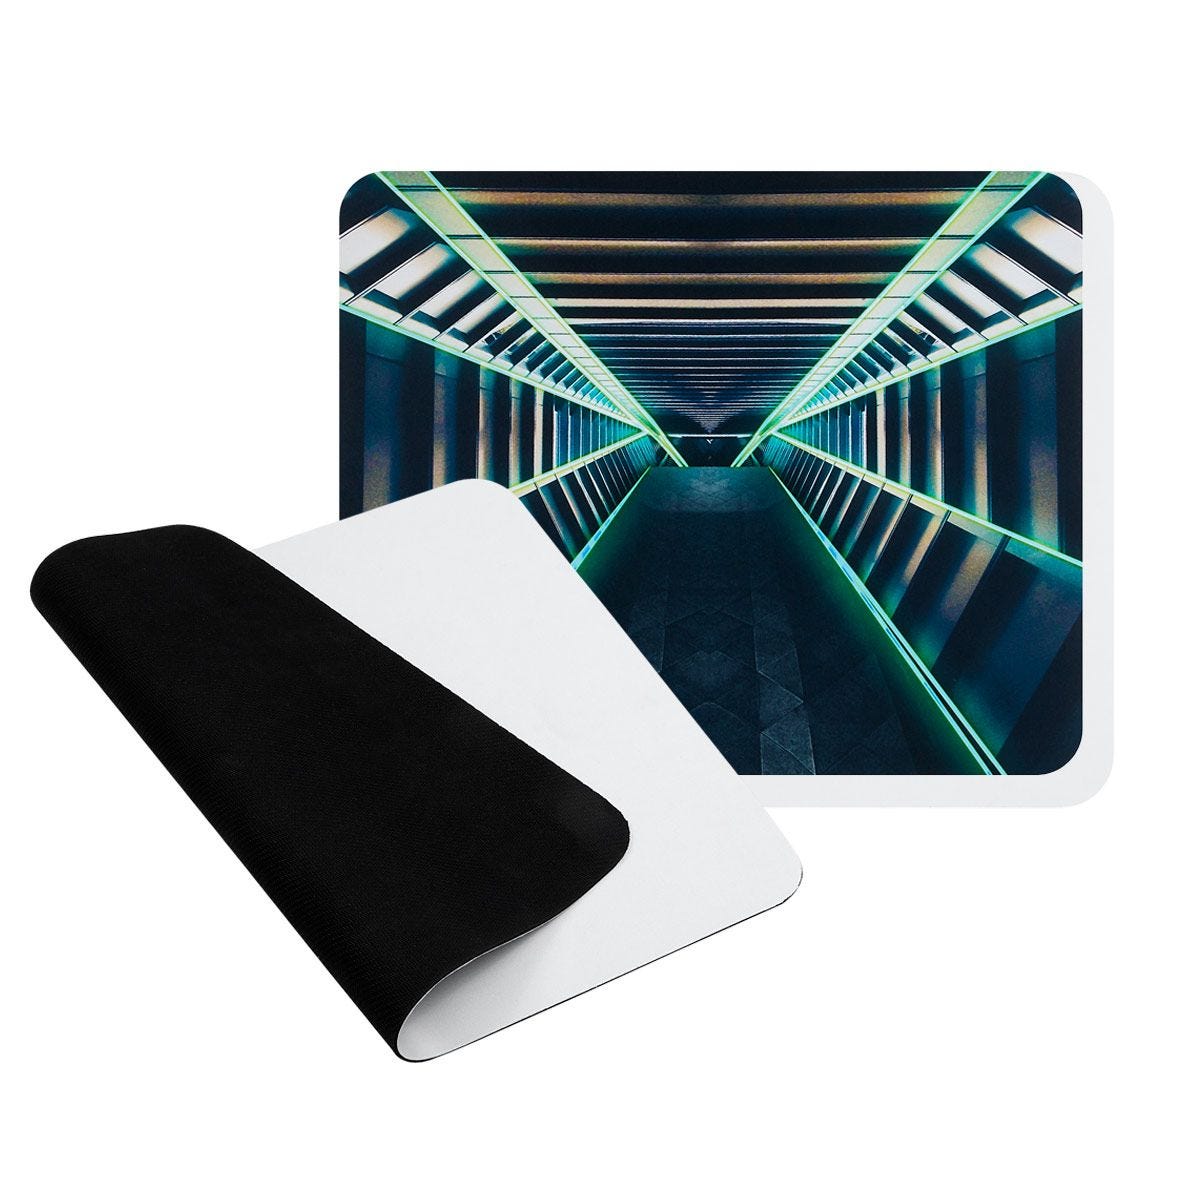 CC364 - MOUSE PAD GAMER MADOOX